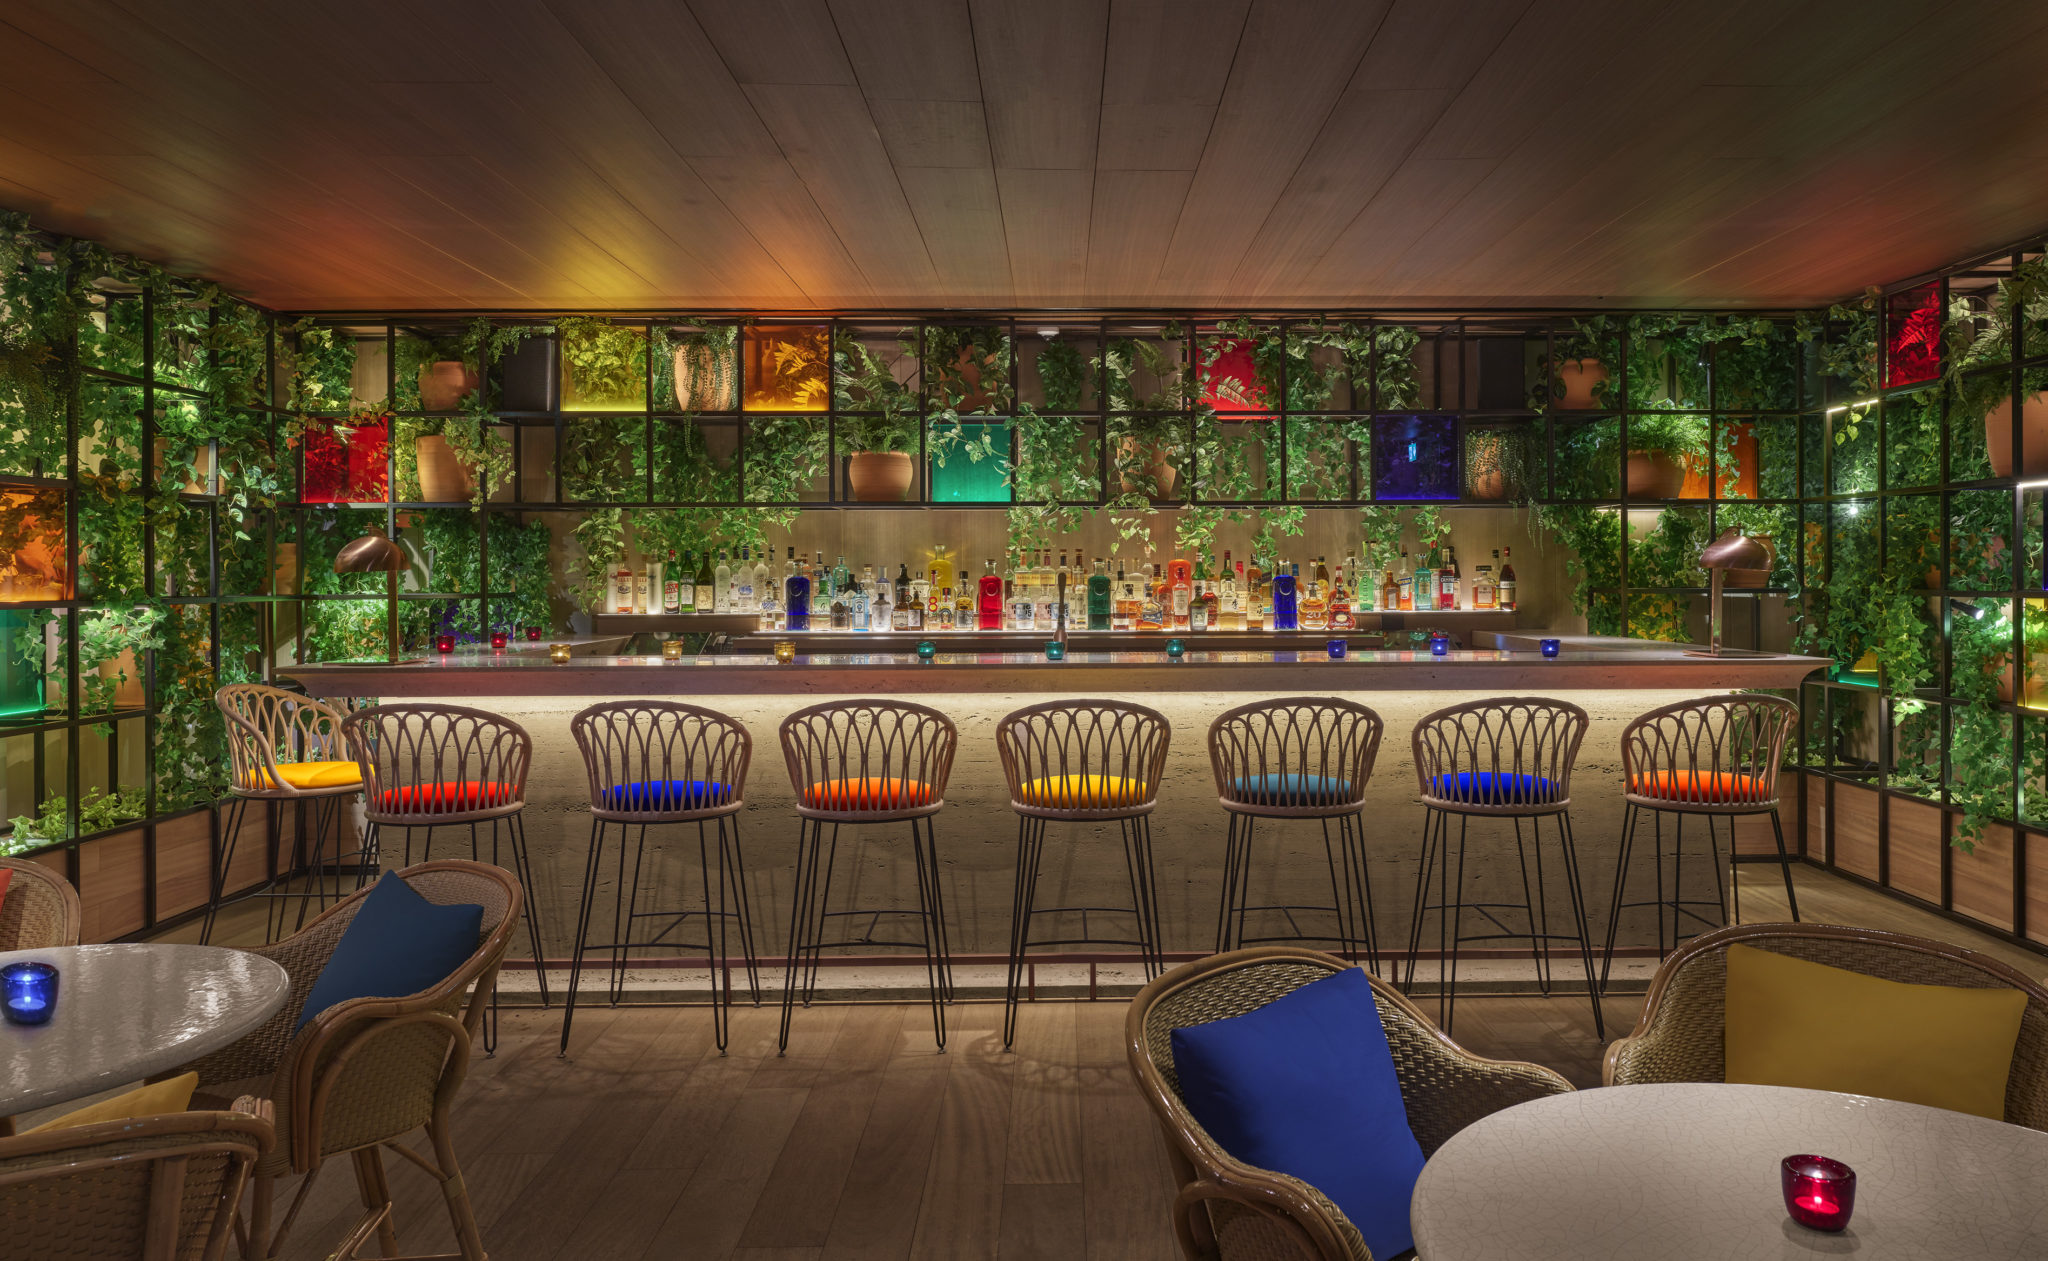 Colorful bar with vines growing throughout the space